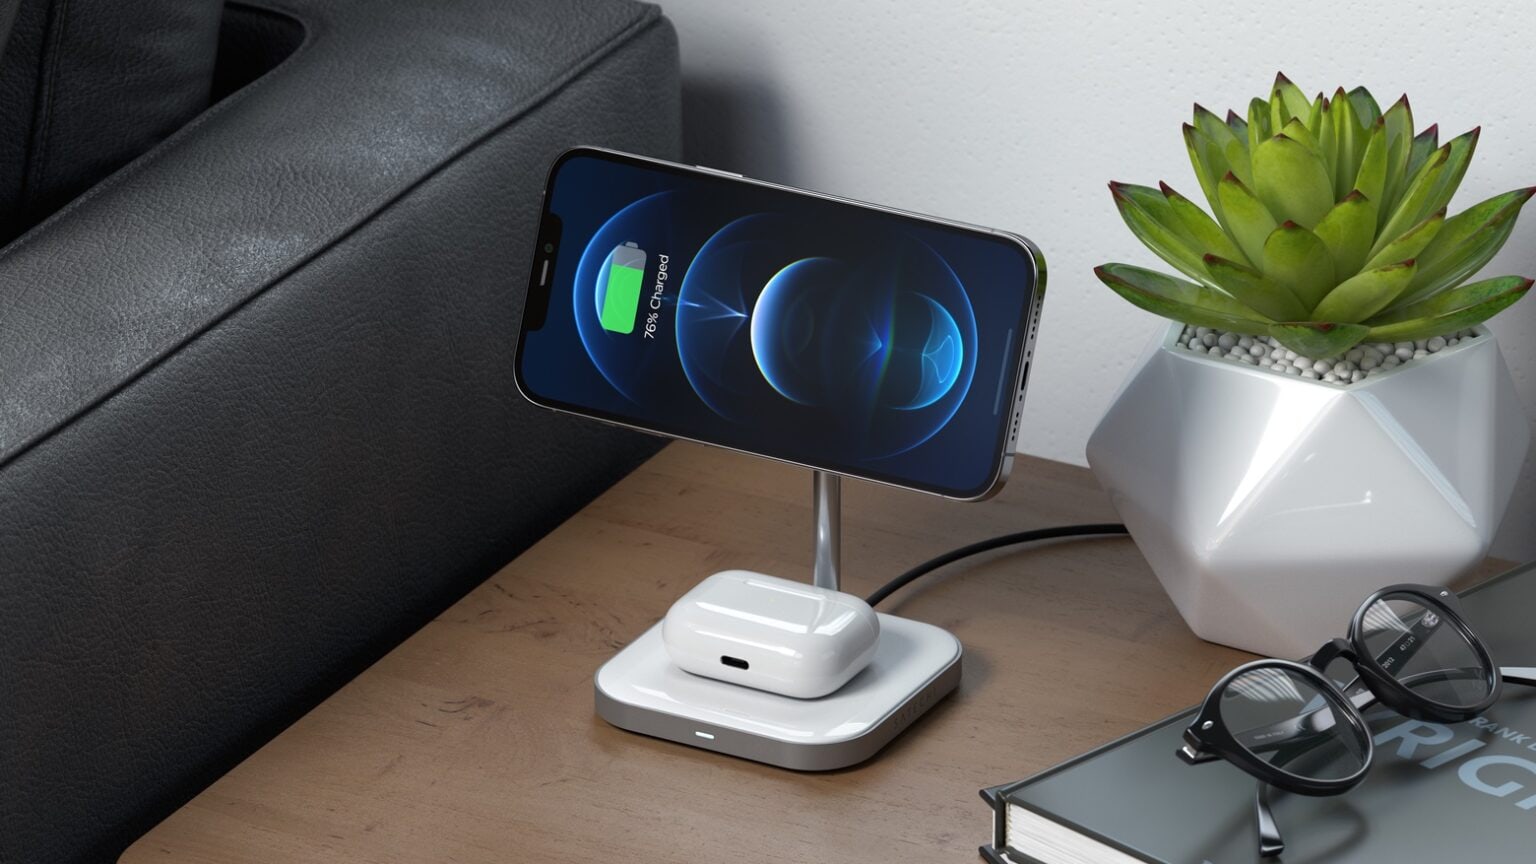 Satechi Aluminum 2-in-1 Magnetic Wireless Charging Stand was unveiled at CES 2021.